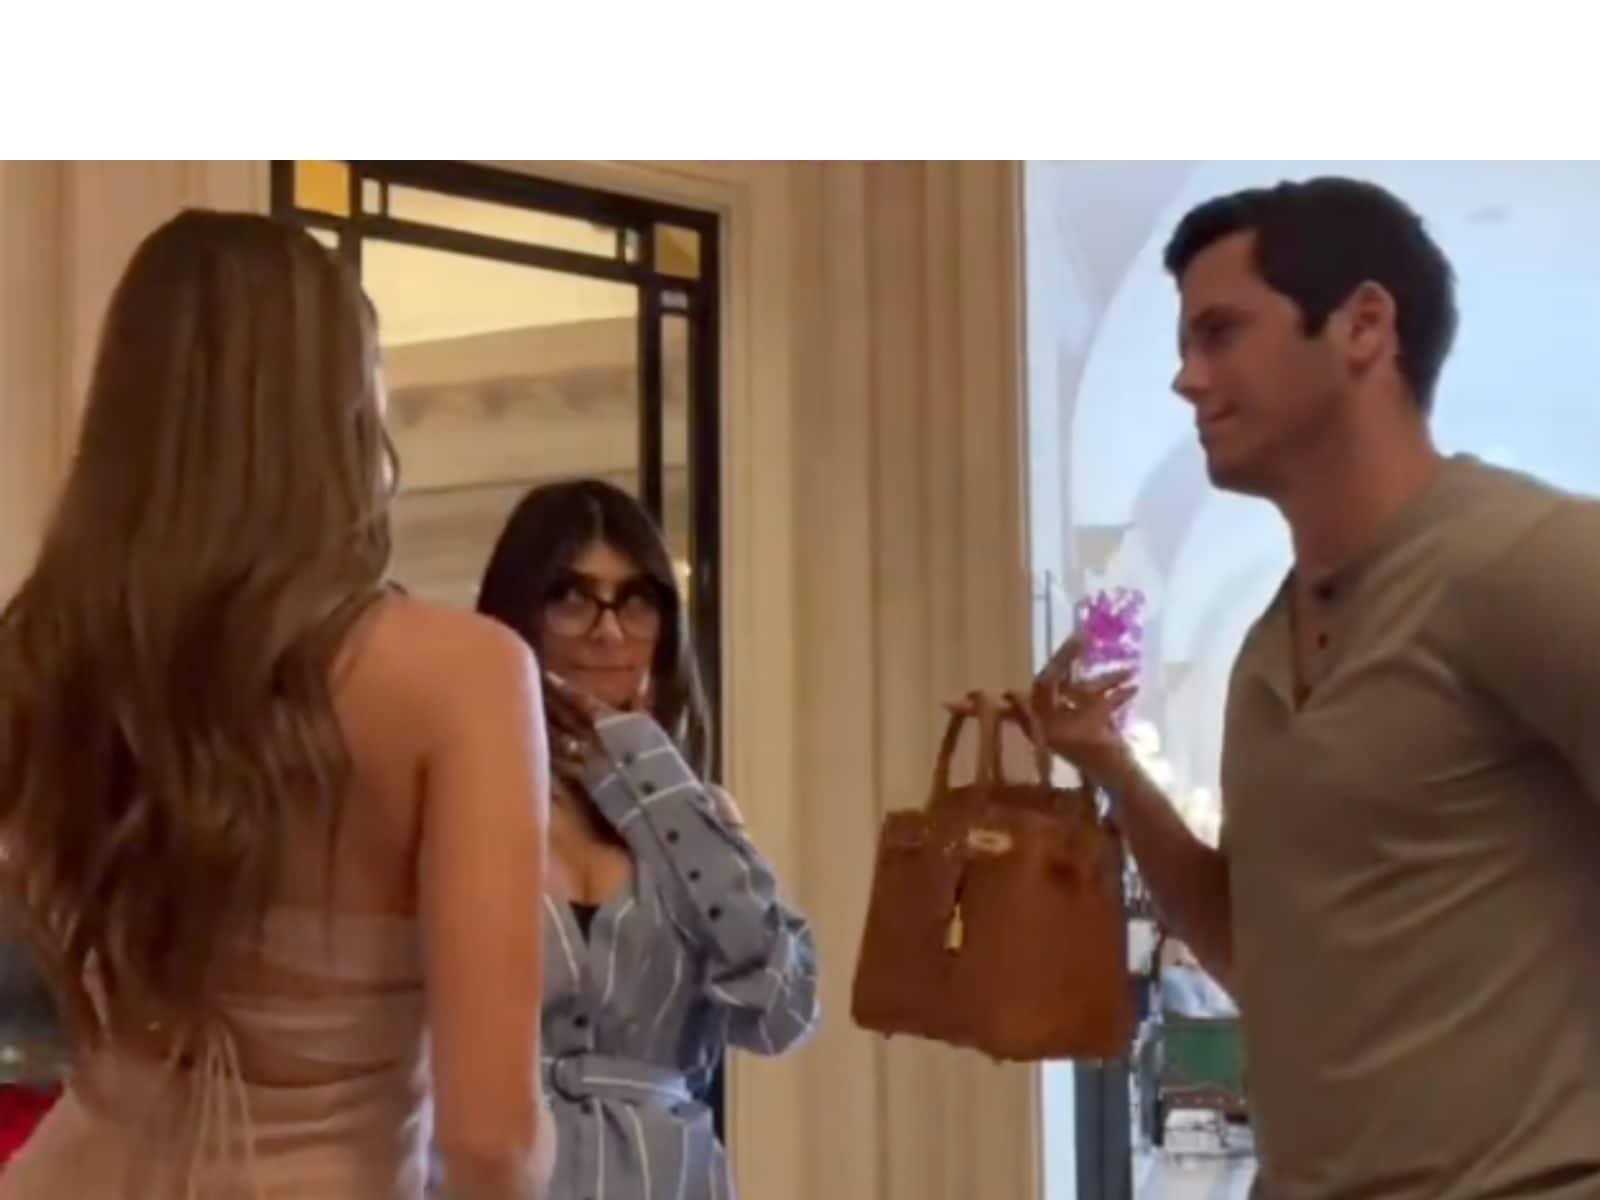 Man Buys Wife Birkin Bag to Say Sorry for Recognising Mia Khalifa While on Honeymoon